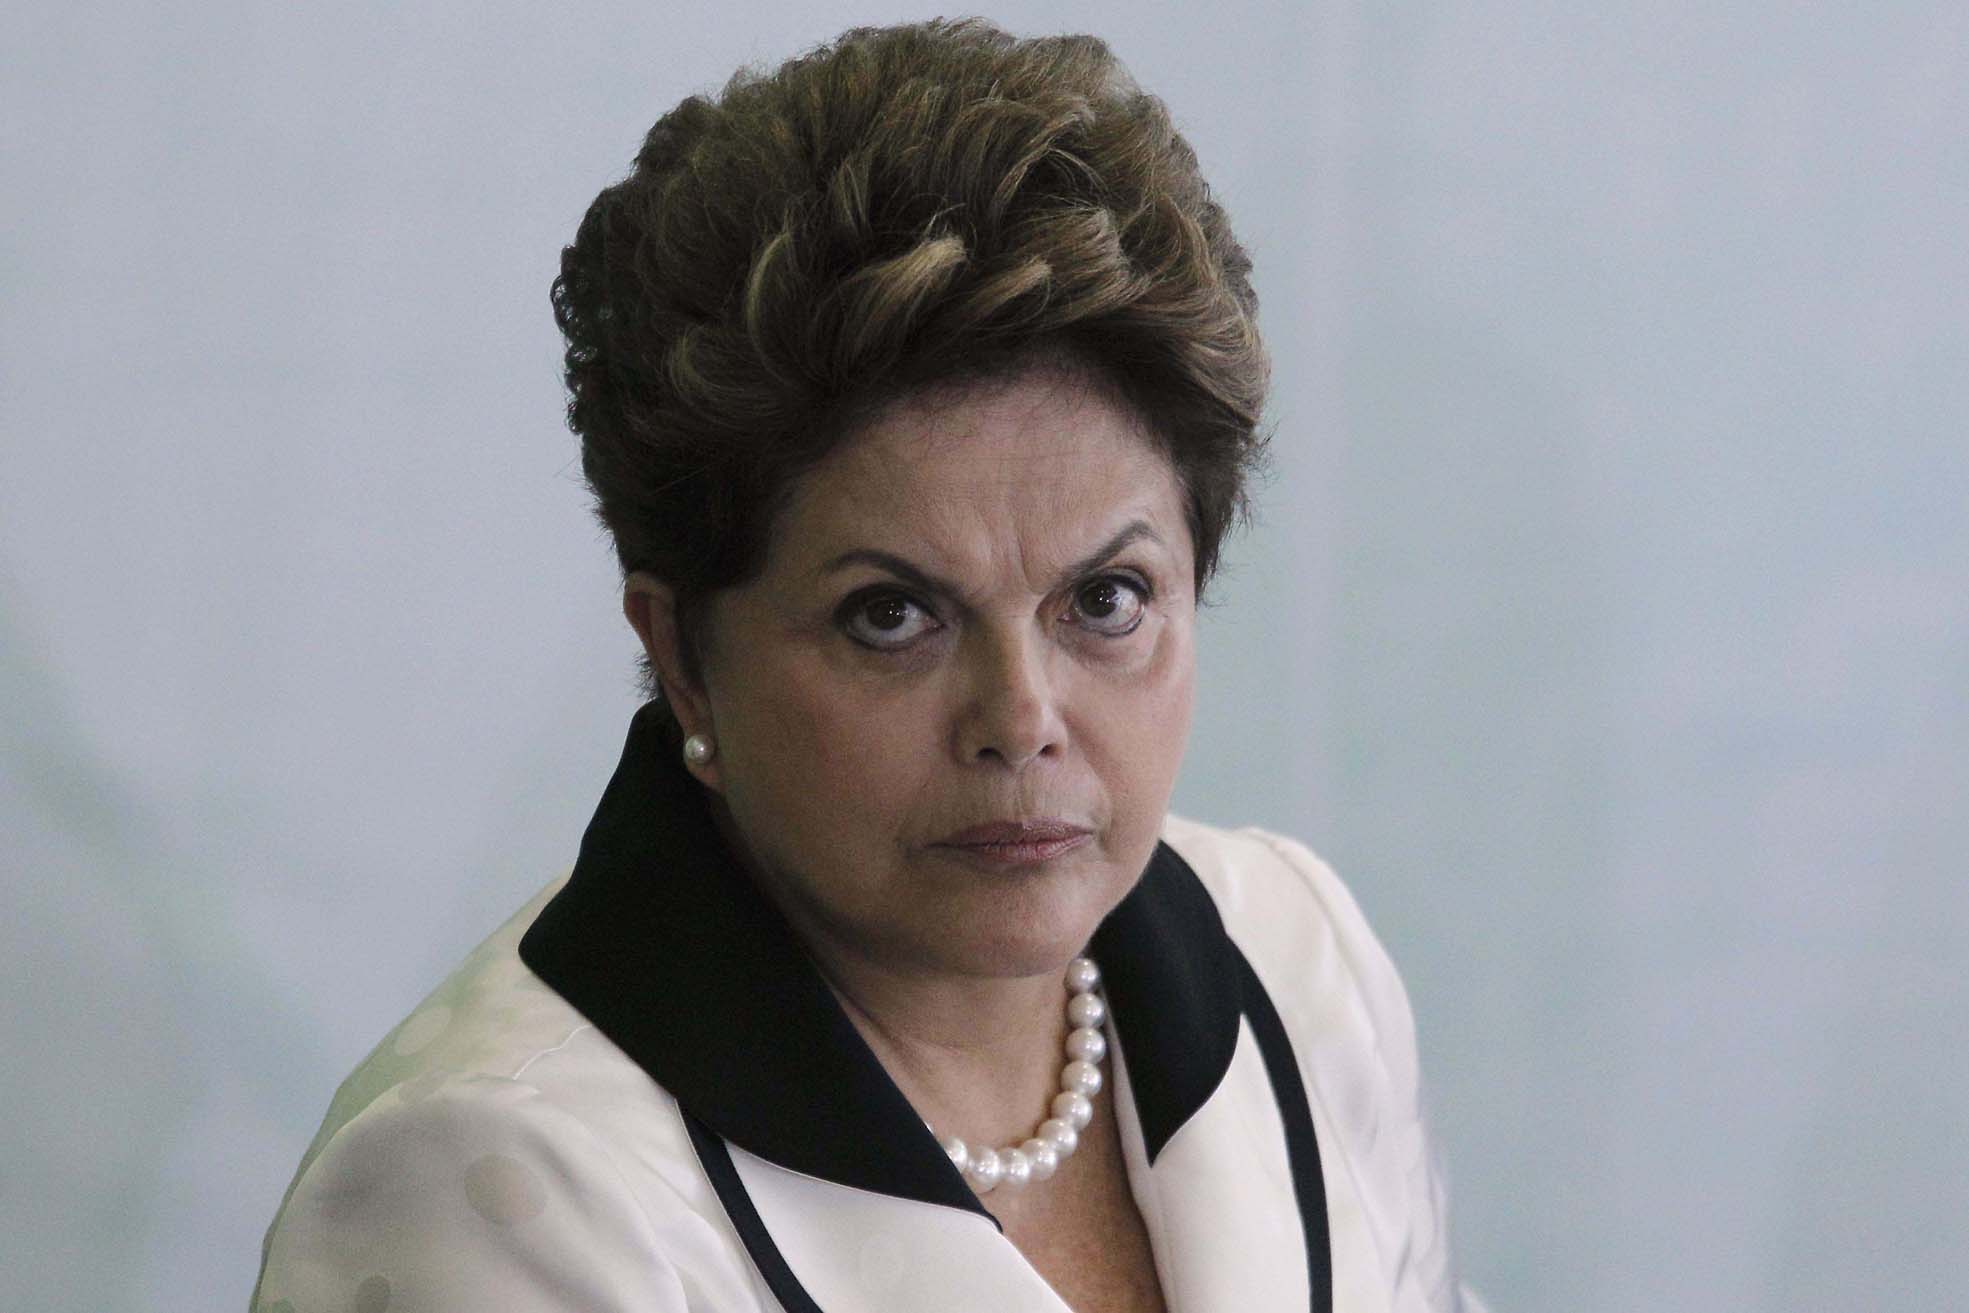 Brazil's President Dilma Rousseff participates in a ceremony of announcement for new measures of the Plan "Brasil Maior" and the installation of Sector Councils for competitiveness in Brazil April 3, 2012. Anxious to give more competitiveness to industries affected by the appreciation of the real, the government announced an overhaul in credit lines, reducing interest rates and longer period for payment, according to local media. REUTERS/Ueslei Marcelino (BRAZIL - Tags: POLITICS BUSINESS)